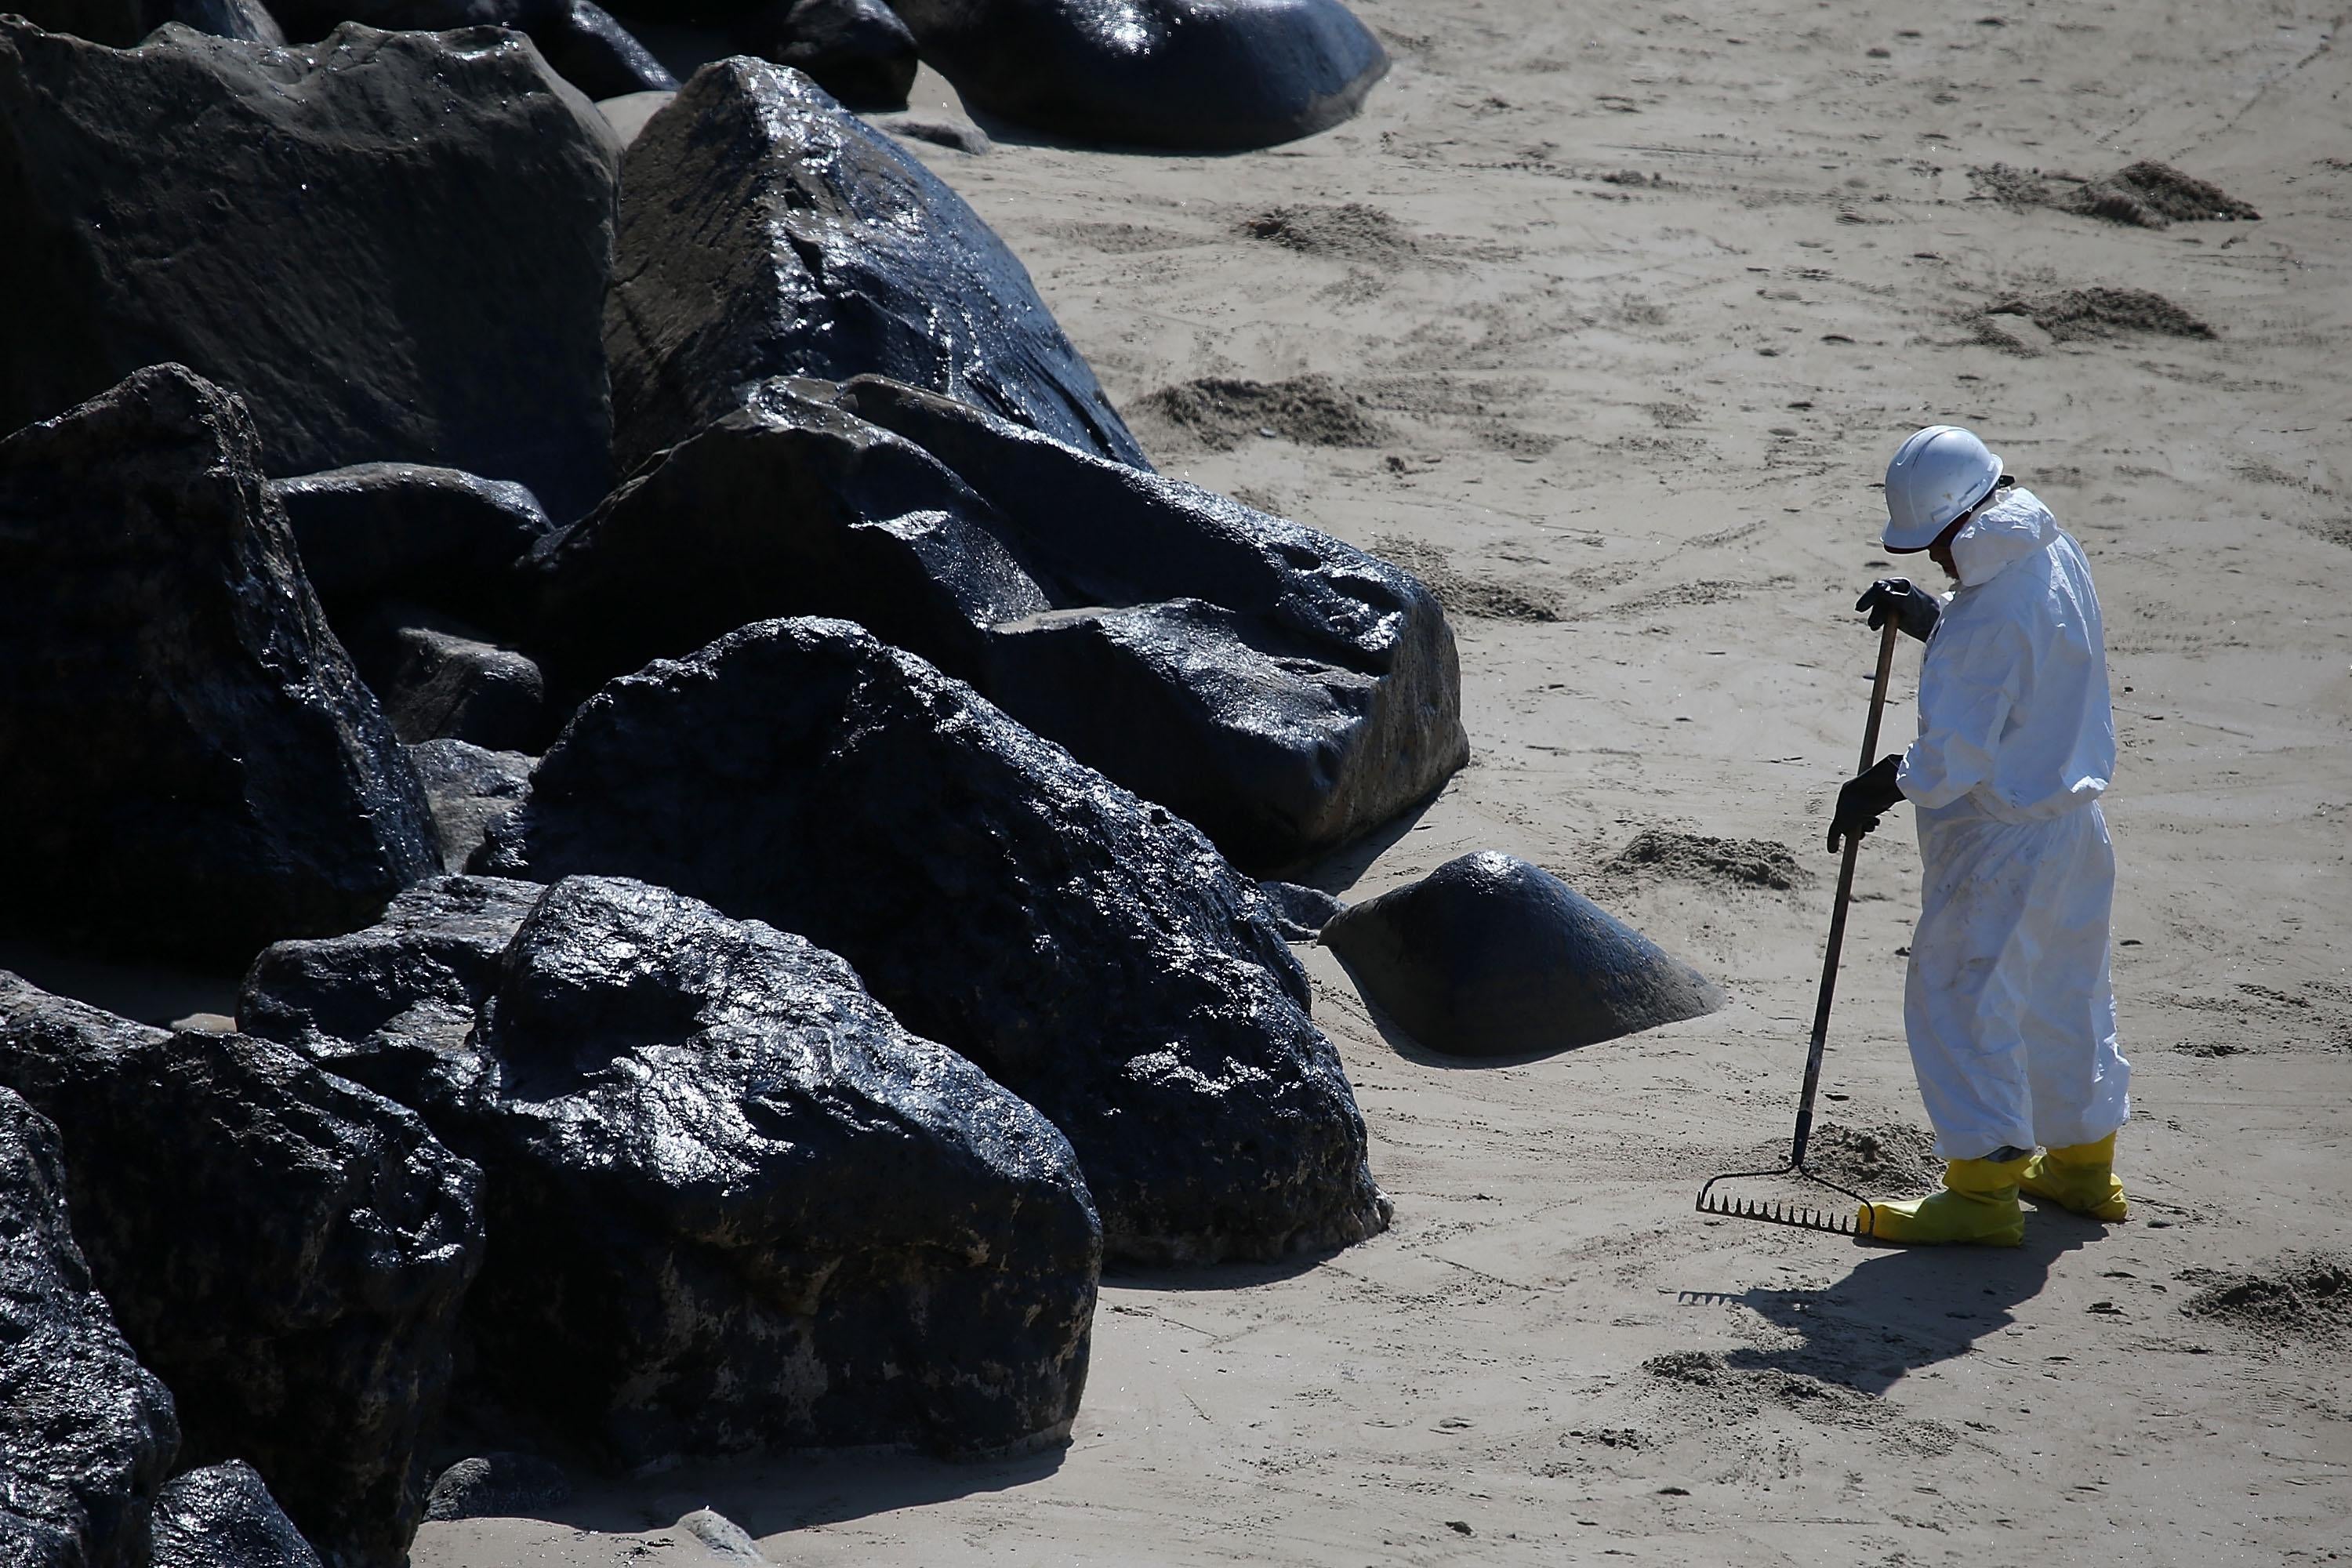 A worker in hazmat gear rakes sand next to oil-covered rocks on a beach.